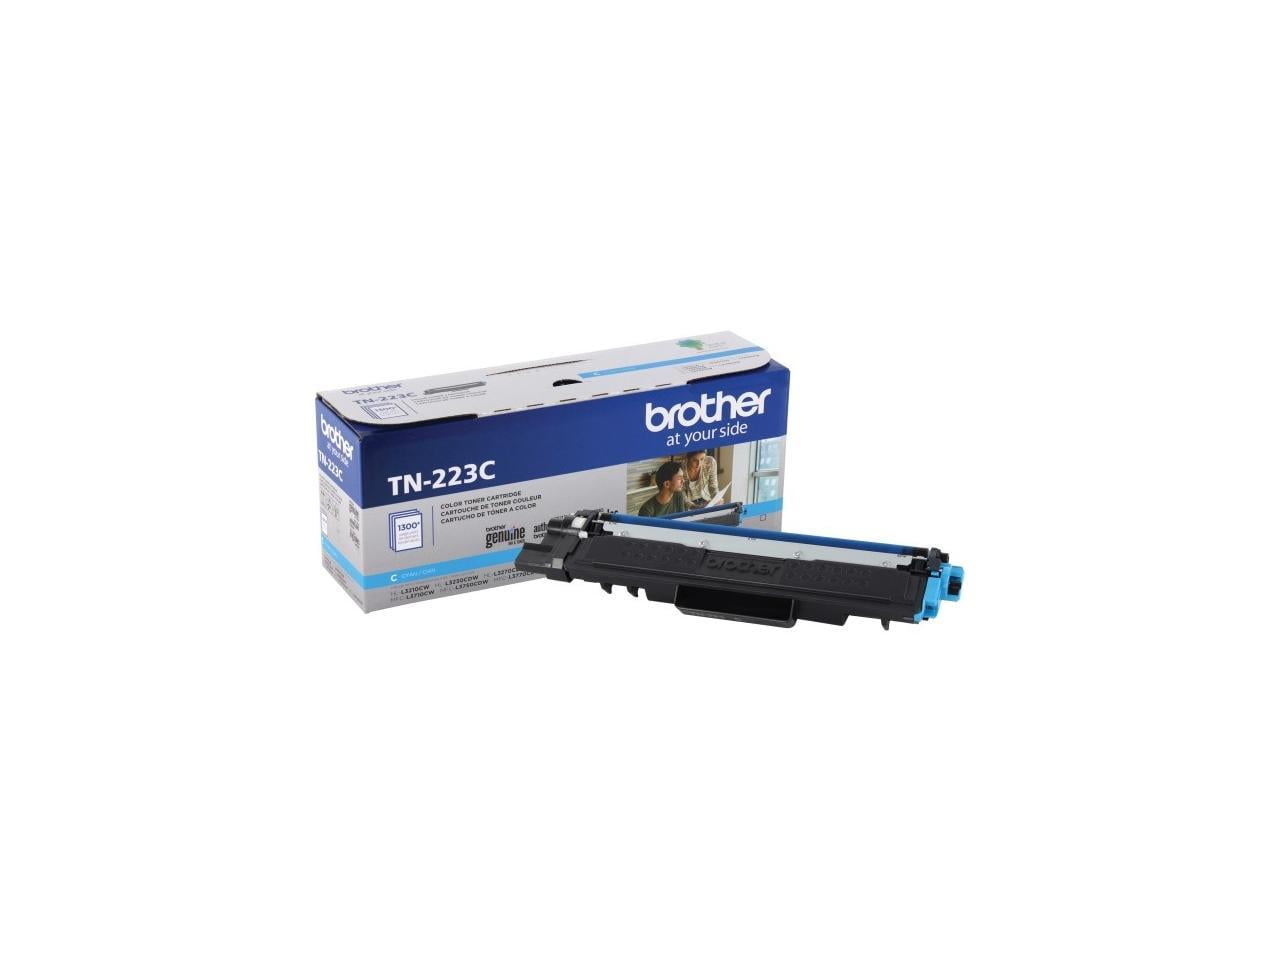 Source TN223, TN-223 TN213 TN243 TN253 TN263 TN273 TN293 Color Toner  Cartridge for Brother printer on m.